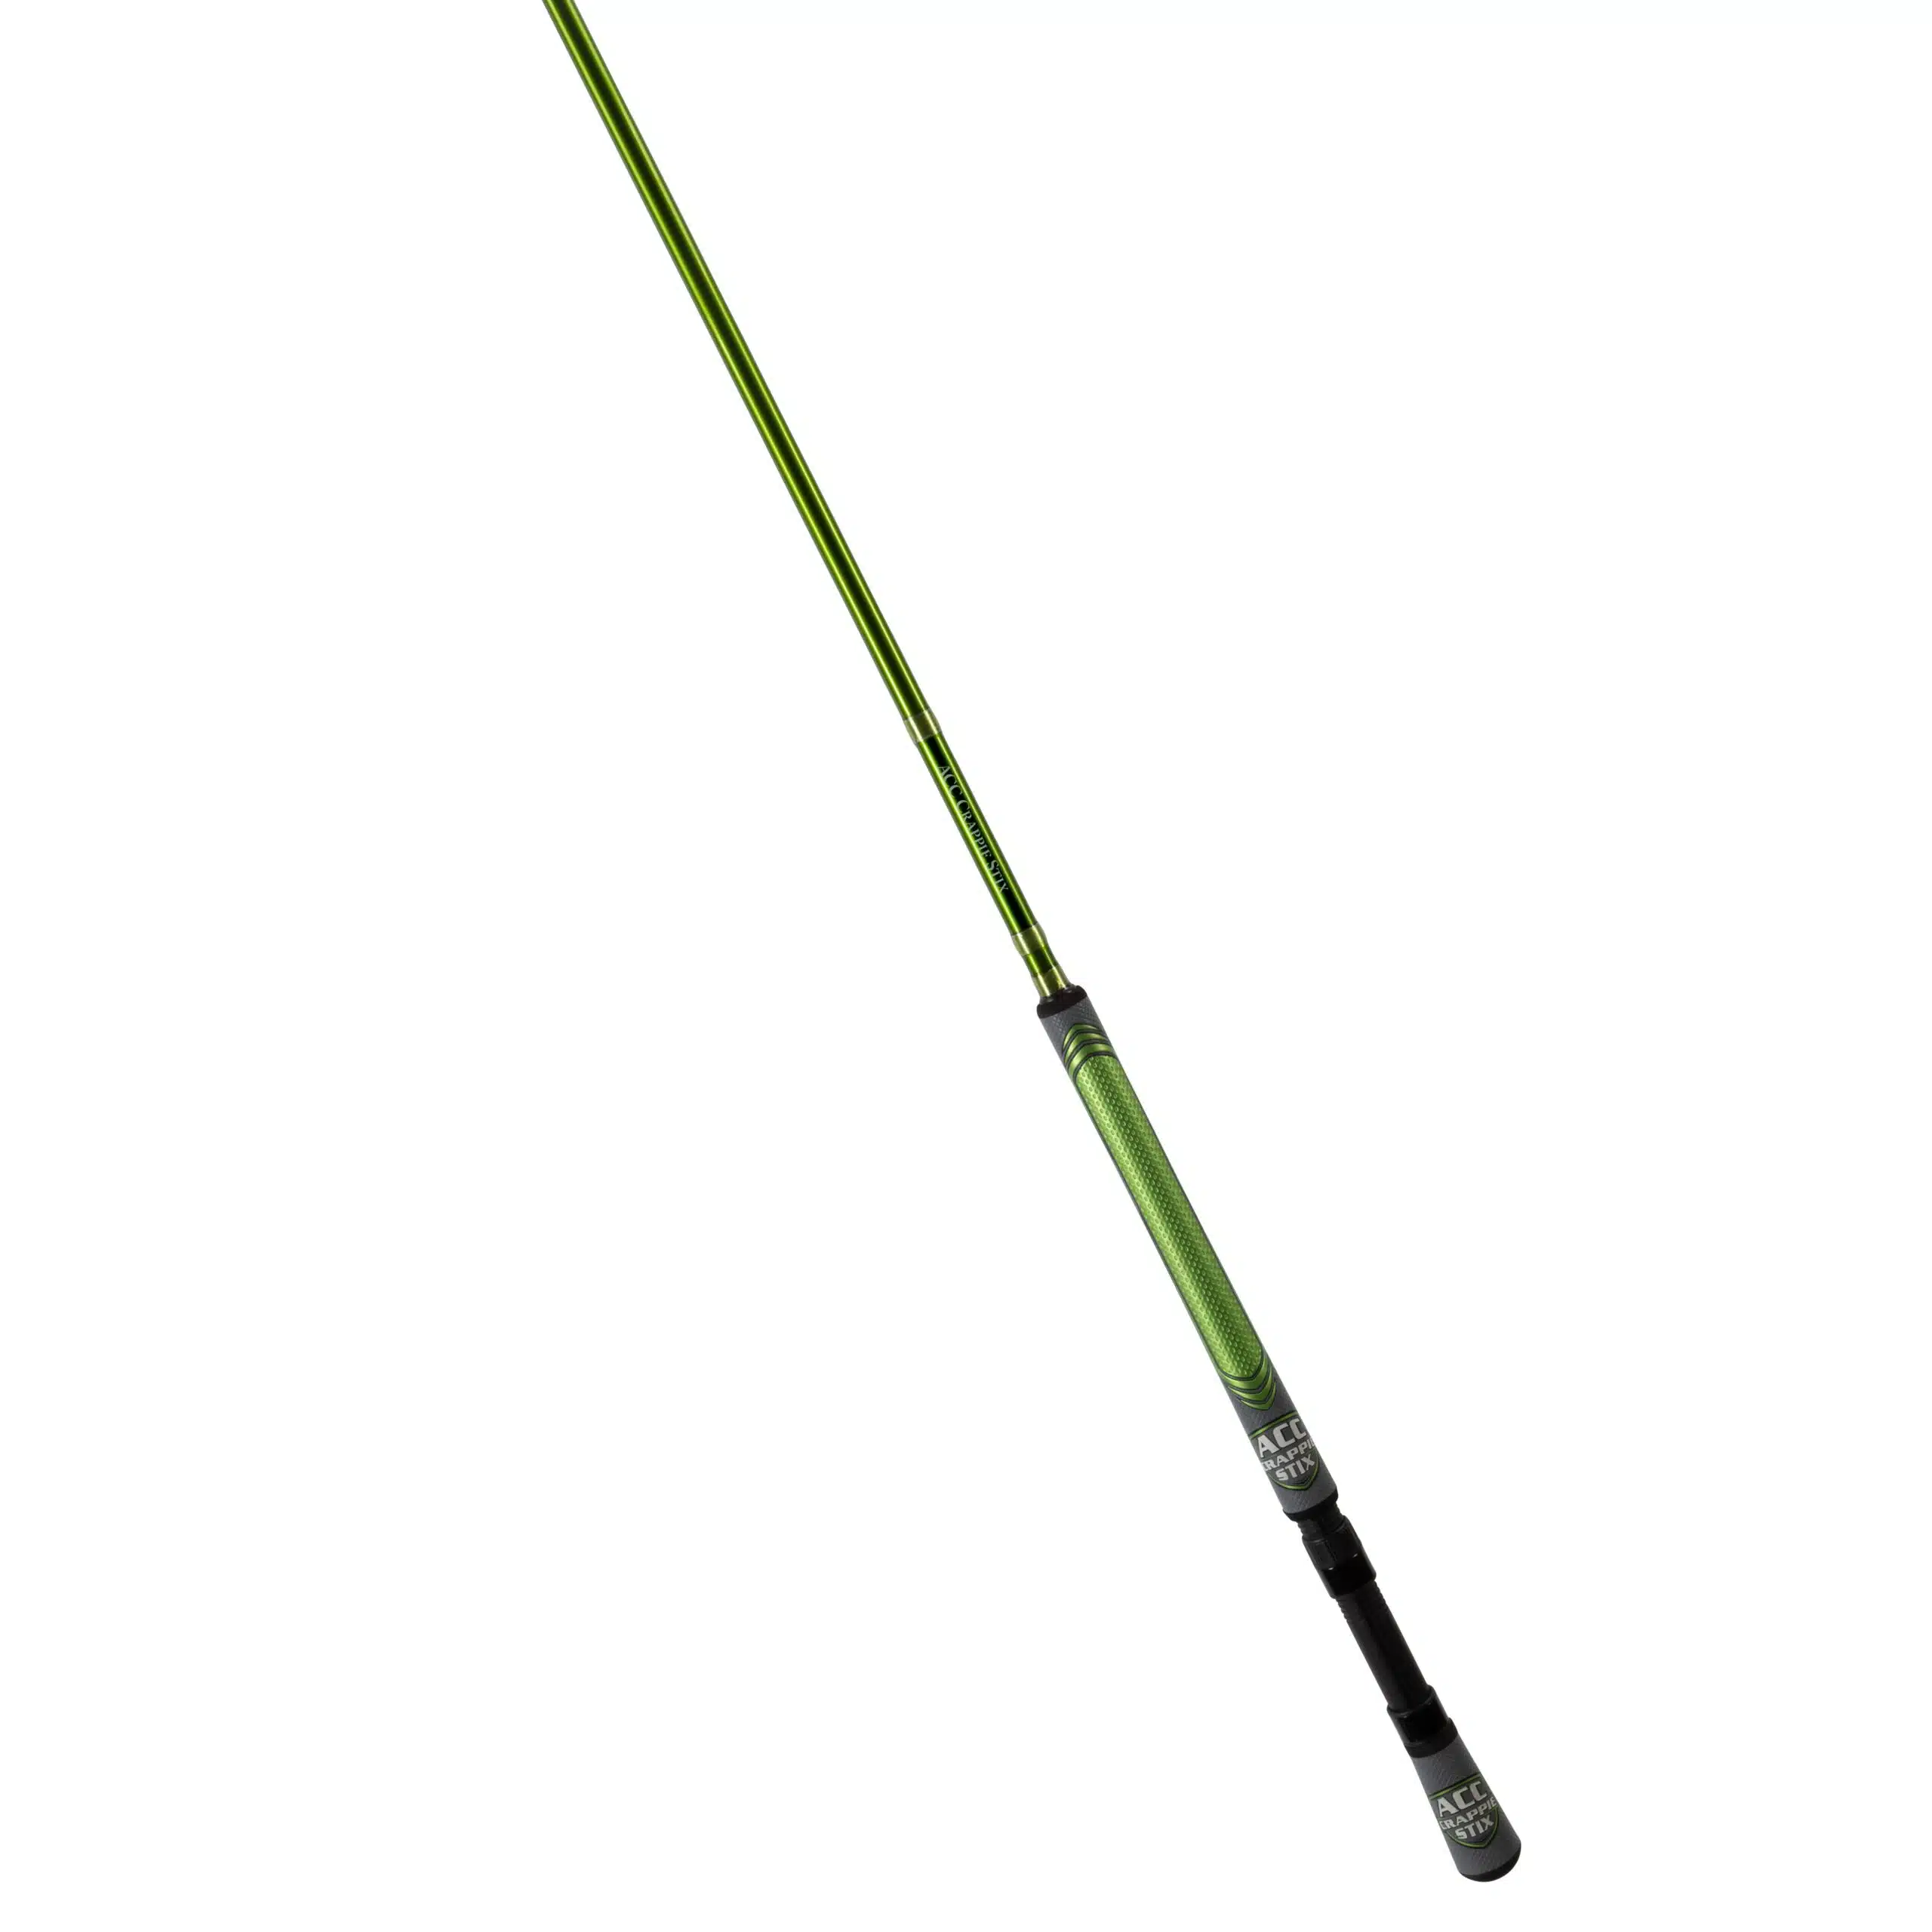 20' TELESCOPIC CRAPPIE POLE HI-TECH SS-20S WITH FOAM GRIP AND REEL SEAT 